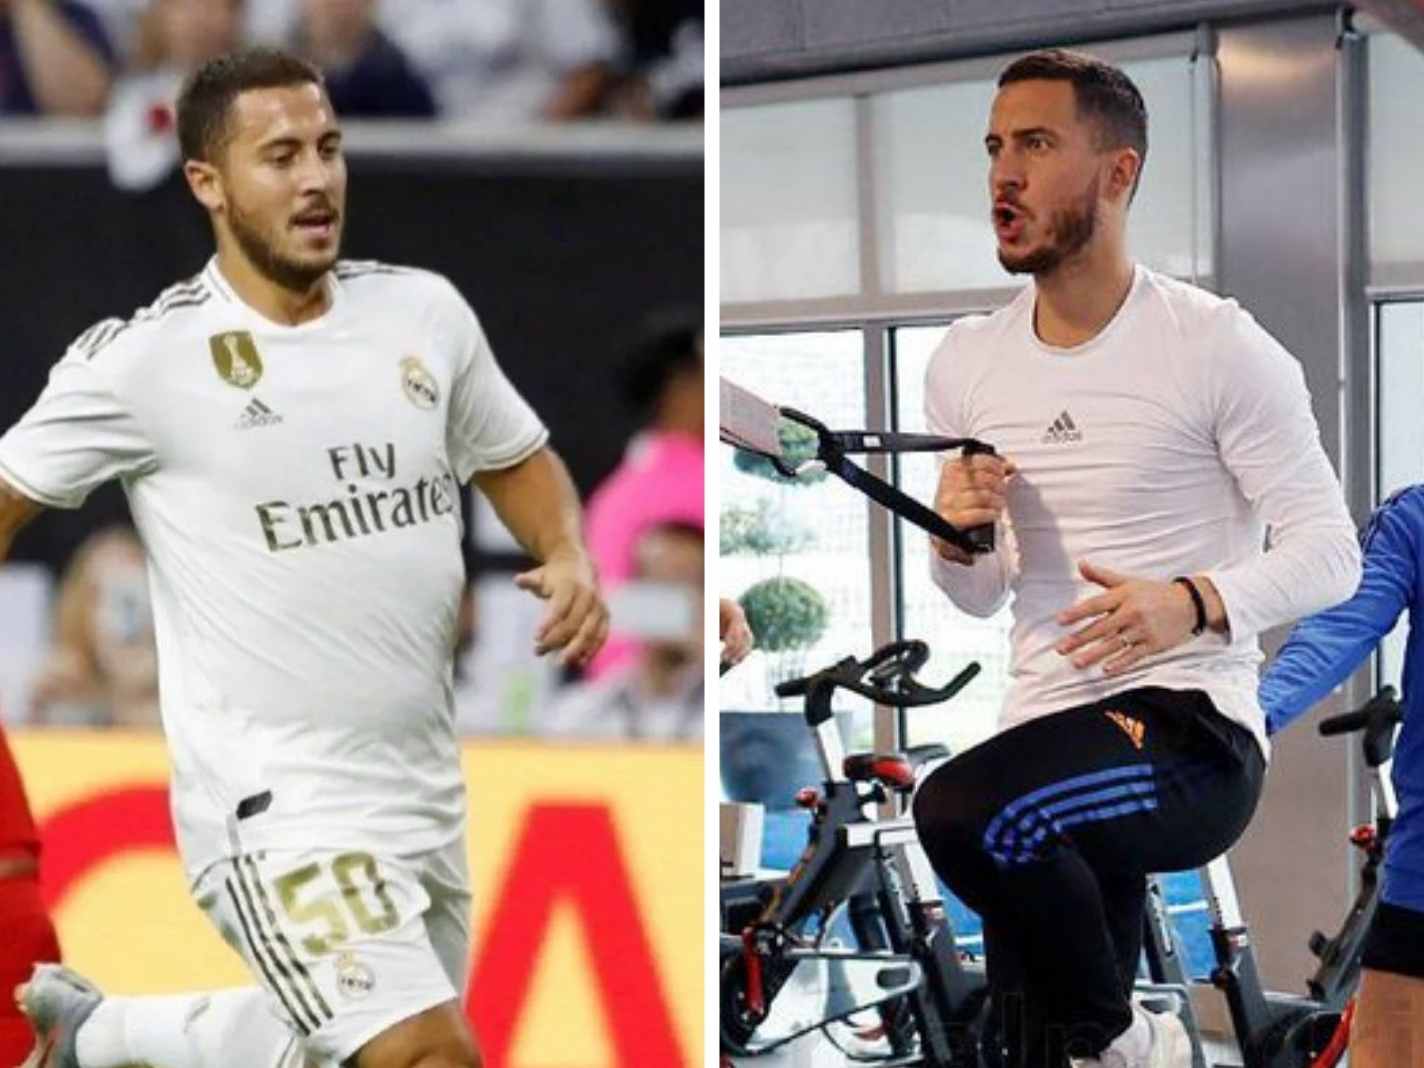 Eden Hazard is undergoing a physical transformation at Real Madrid